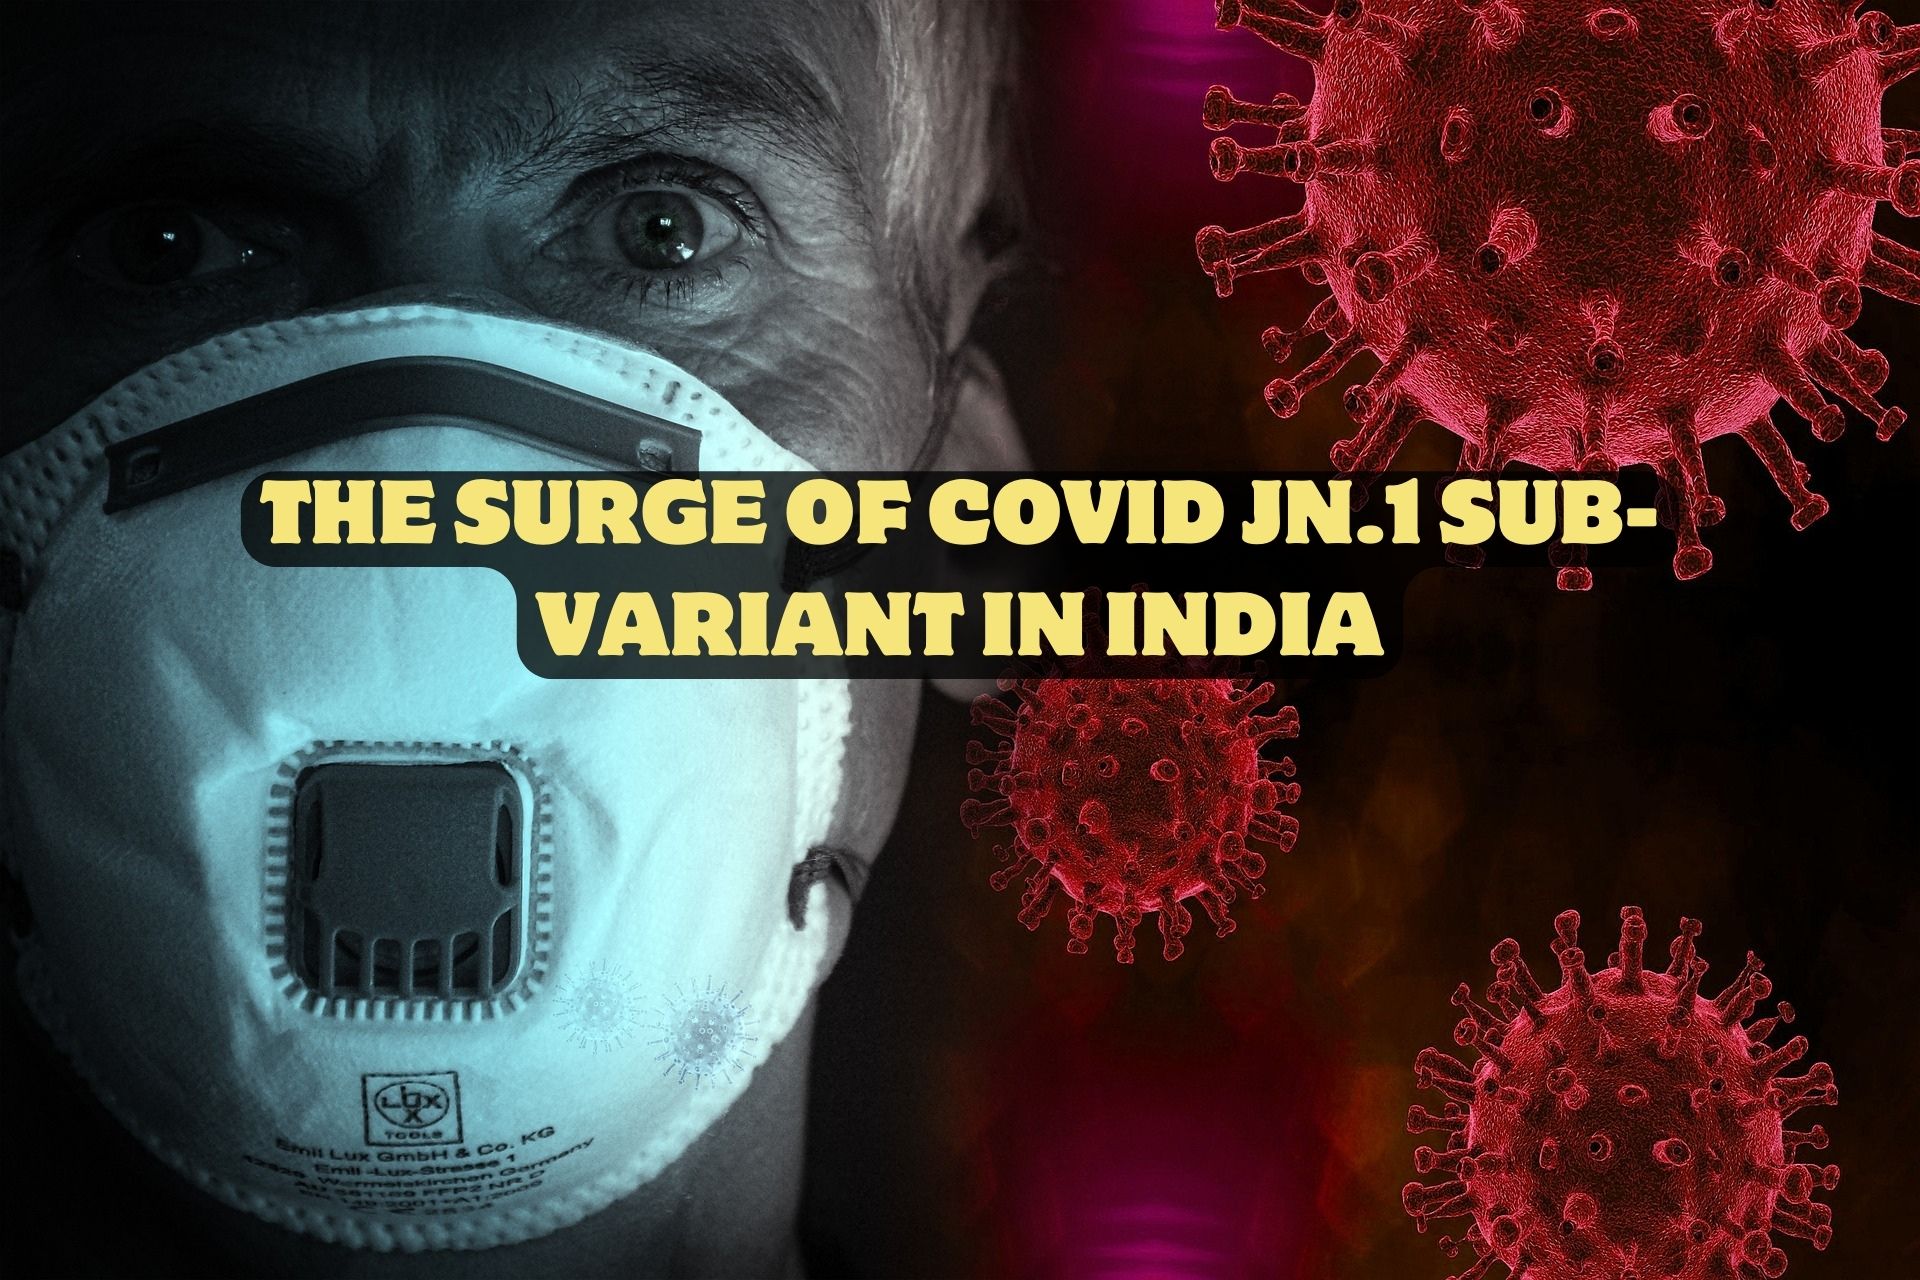 The Surge of Covid JN 1 Sub variant in India